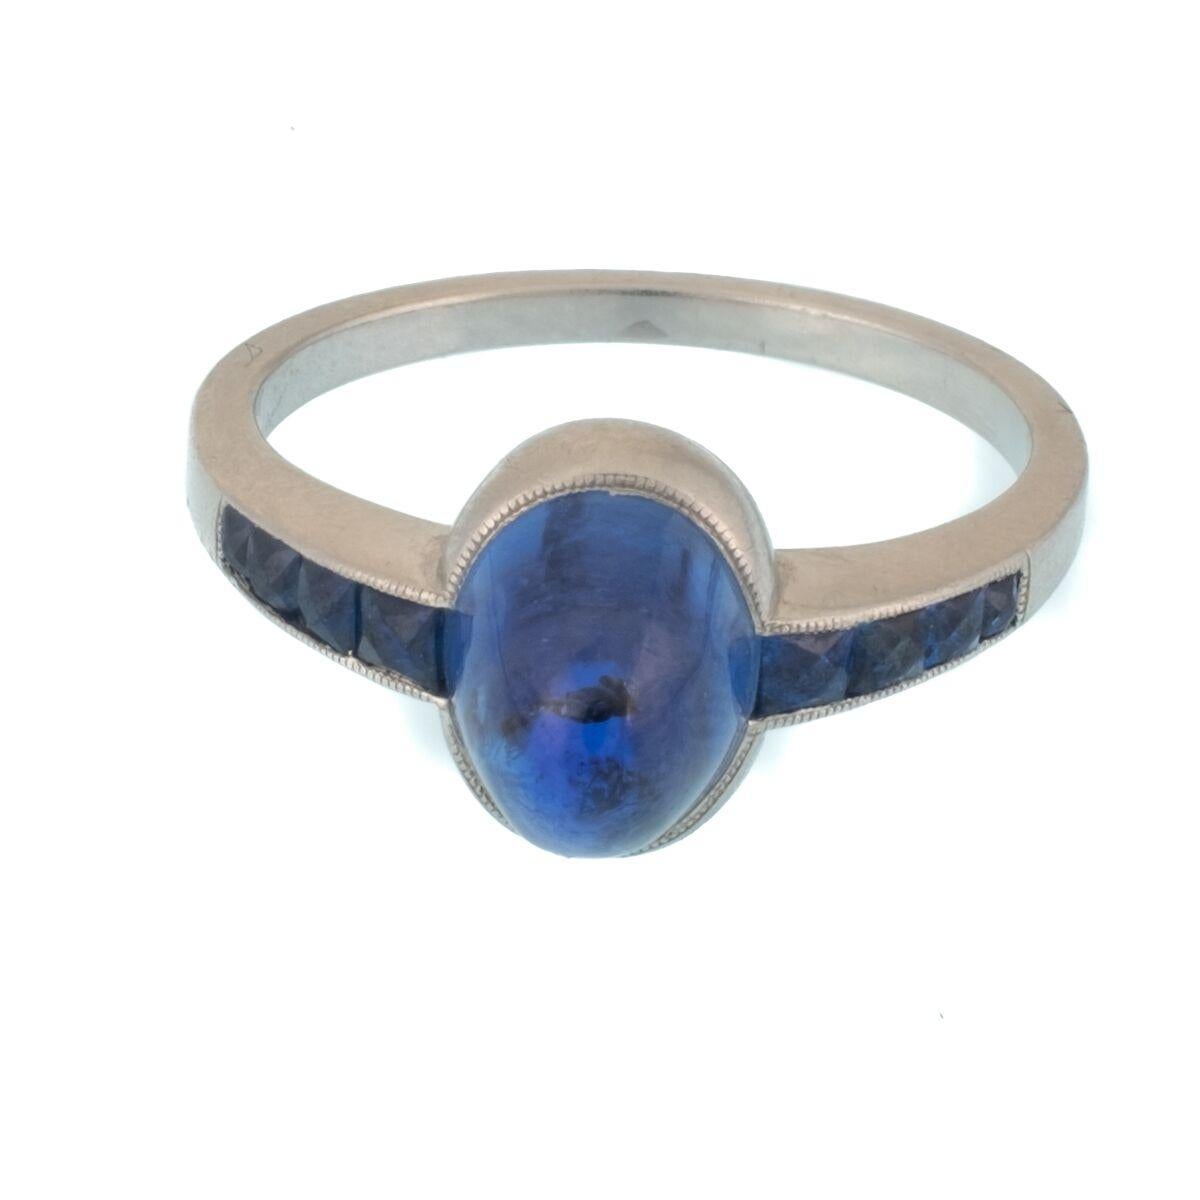 Art Deco Platinum and French Cut Sapphires Featuring a 1.3 Carat Cabochon Sapphire Ring c.1925